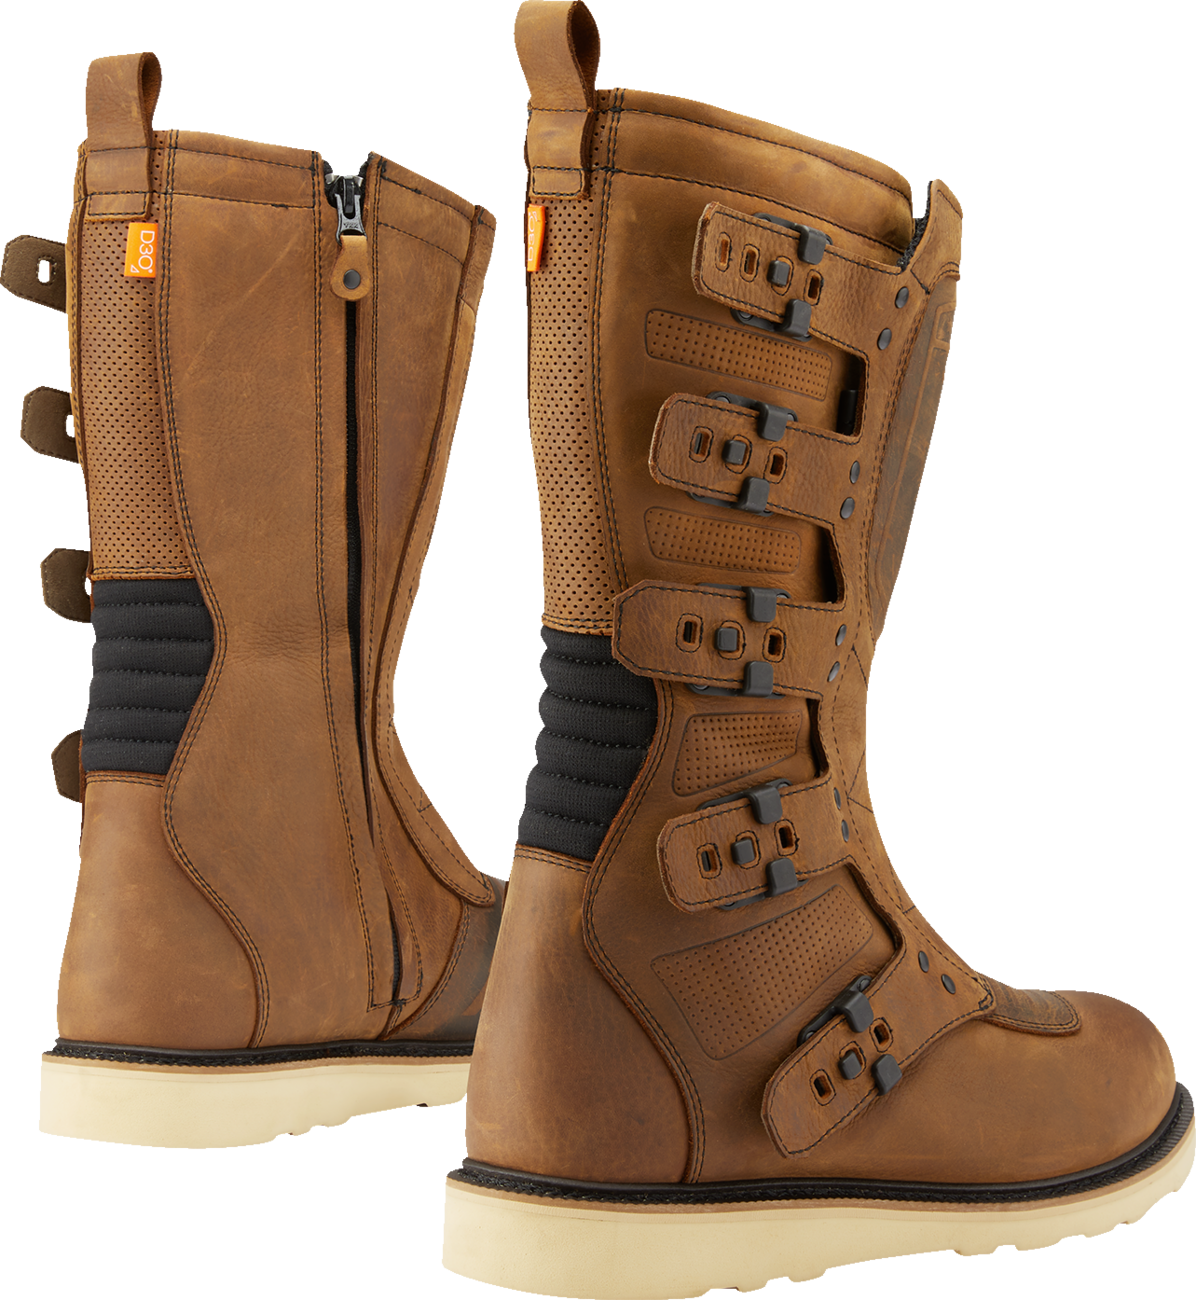 ICON Elsinore 2™ CE Boots - Brown - Size 11.5 3403-1228